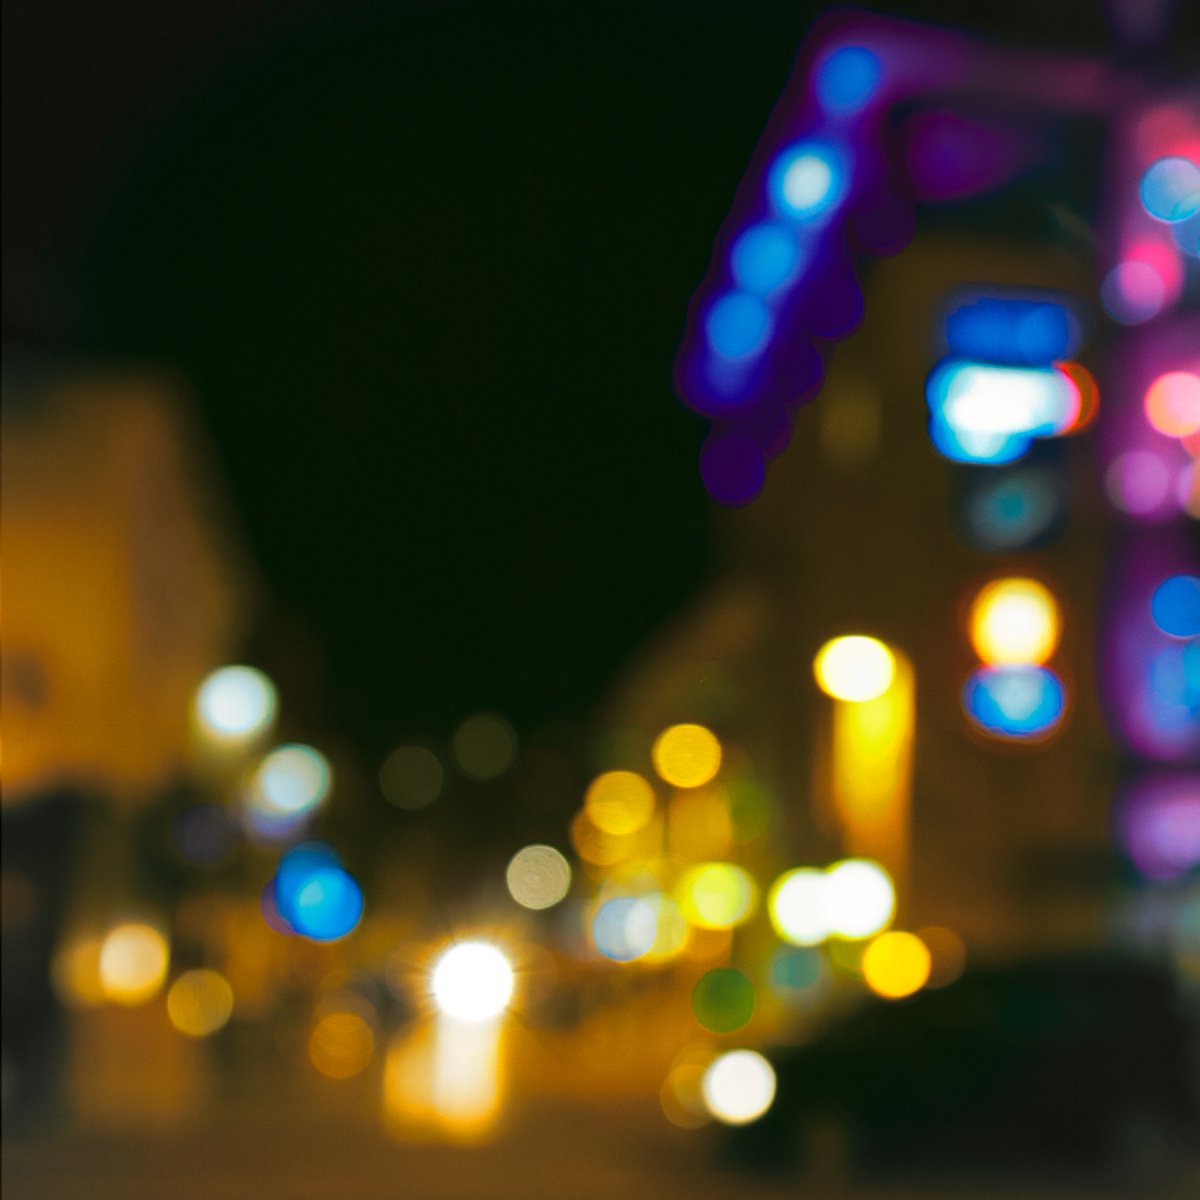 City Lights 6. Limited Edition Abstract Photograph Print  #1/15. Nighttime abstract photography series.